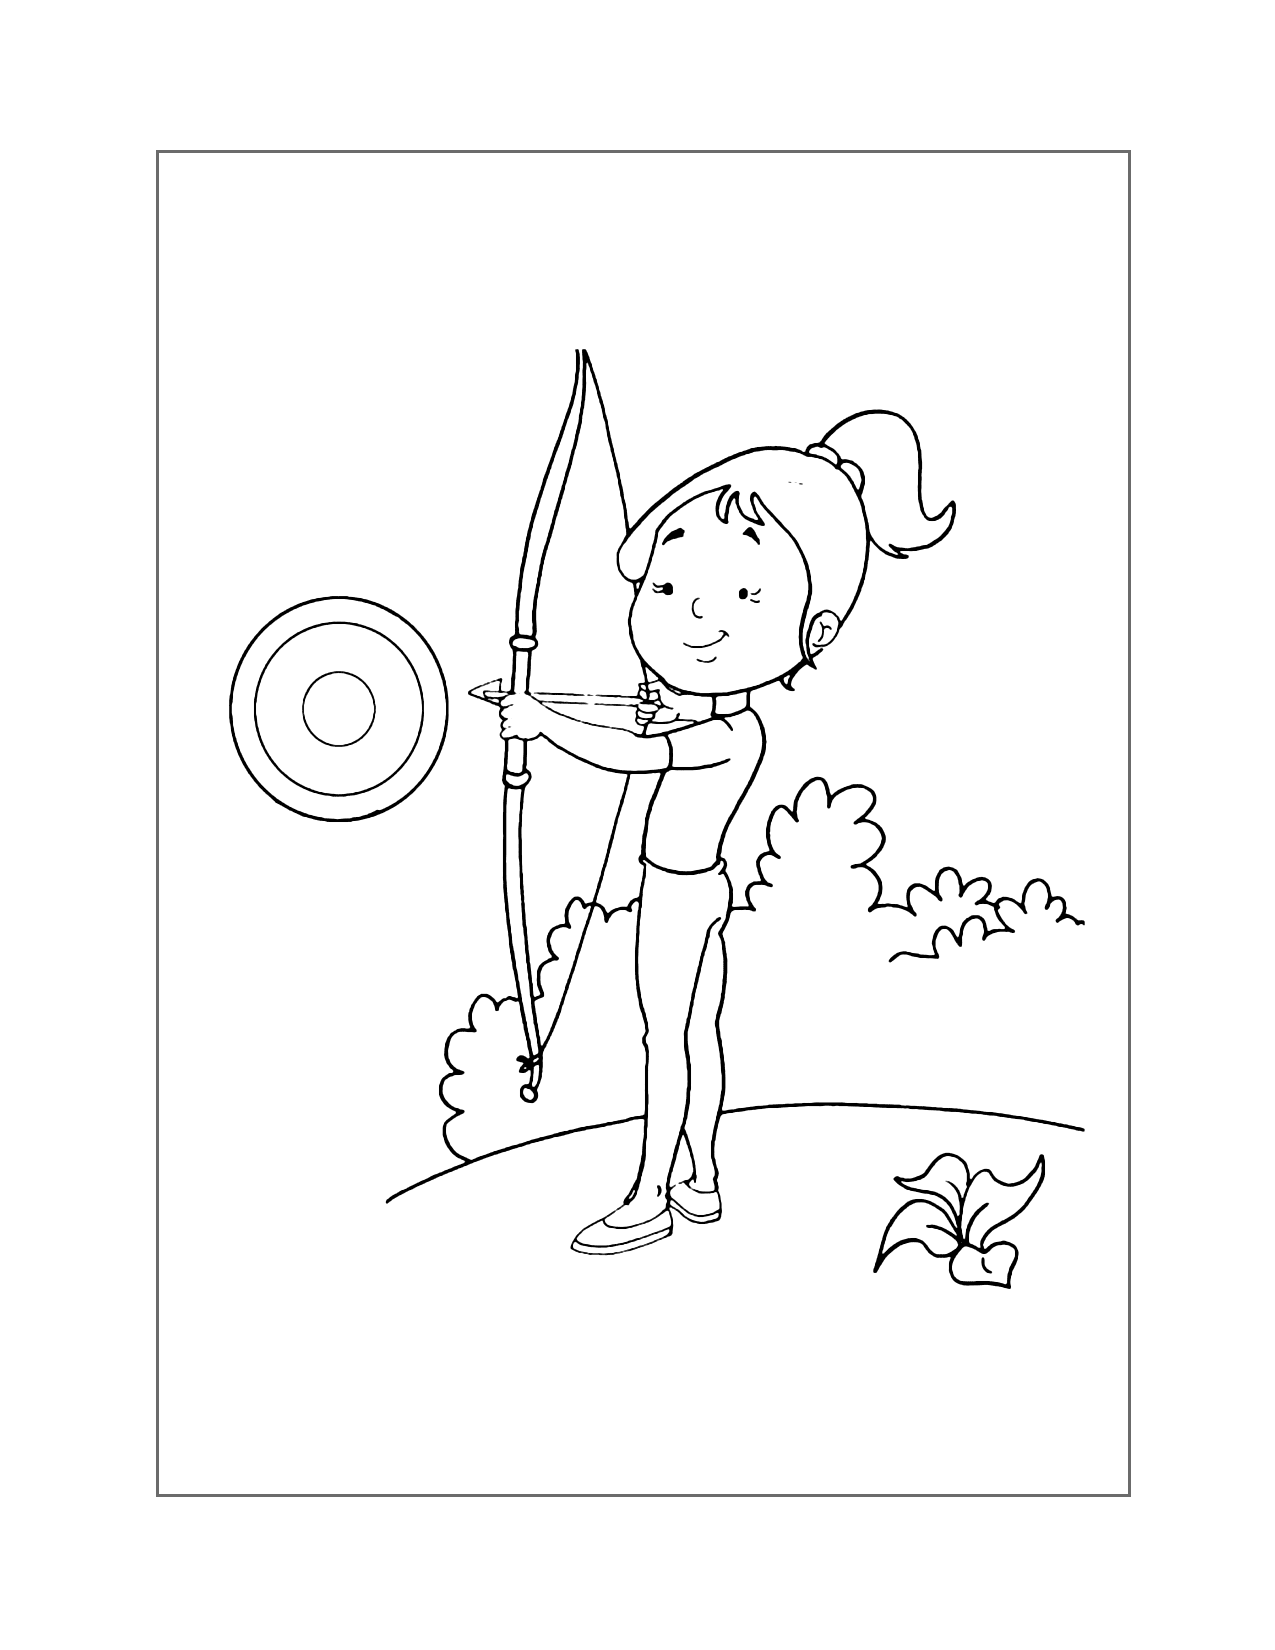 Woman Archer Coloring Page